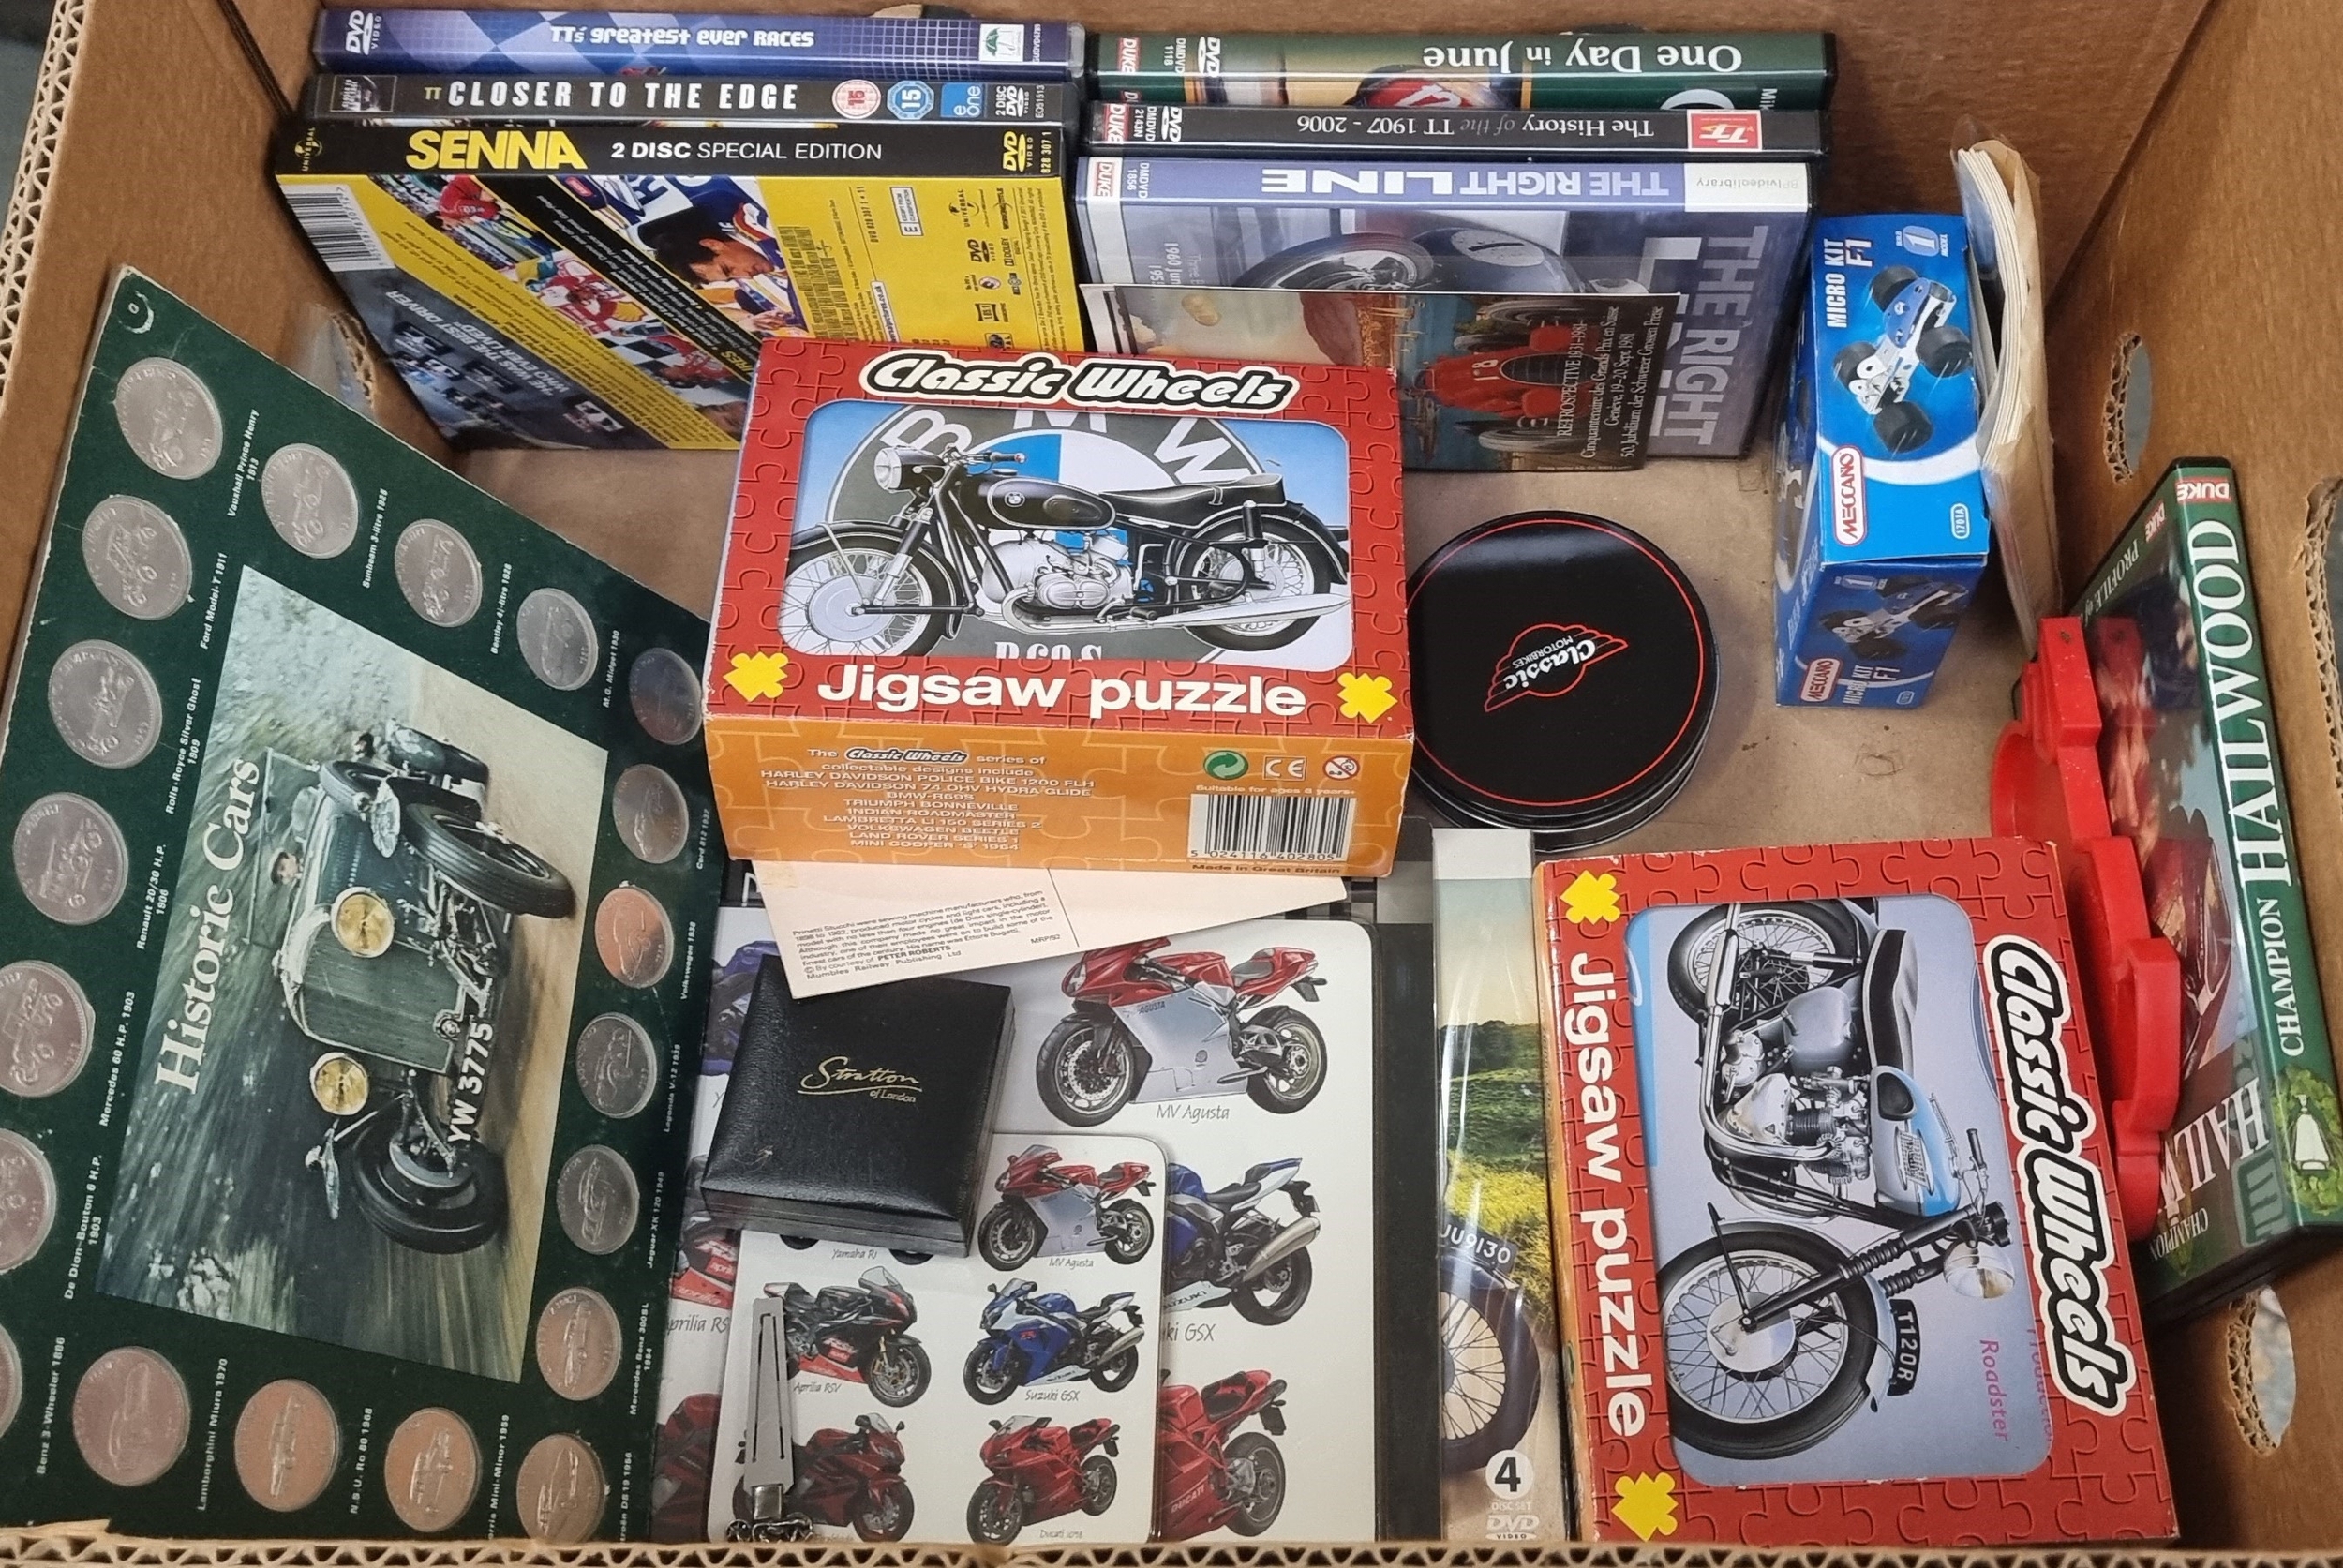 A quantity of motorcycle related prints, DVD's Videos and other related items - Image 2 of 3